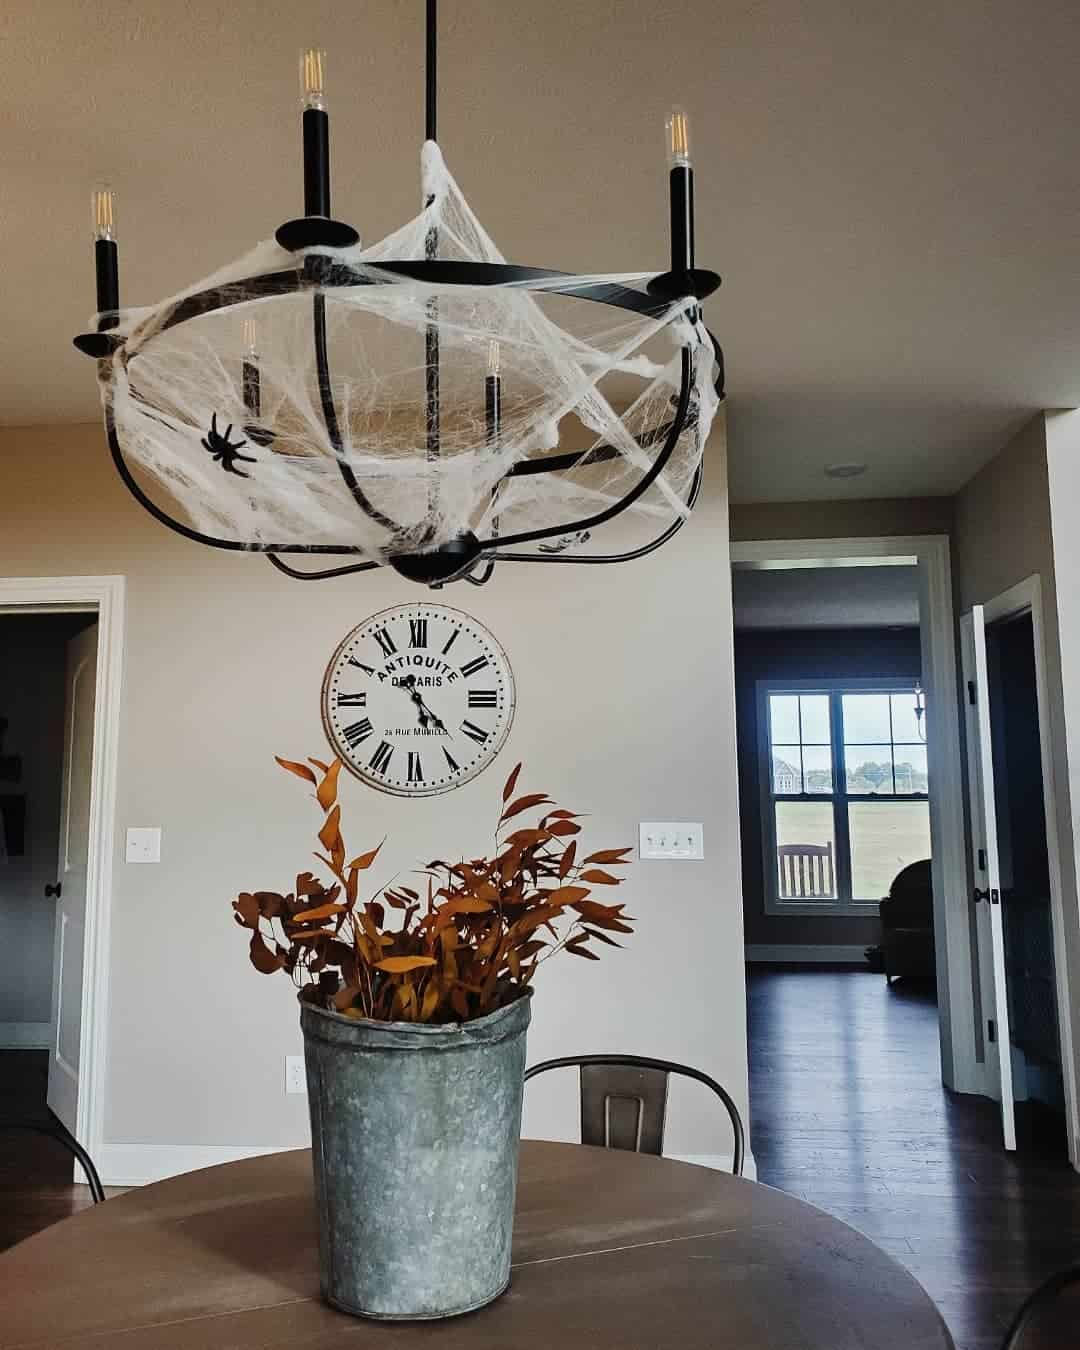 Haunting Chandelier with Spider Web Decor